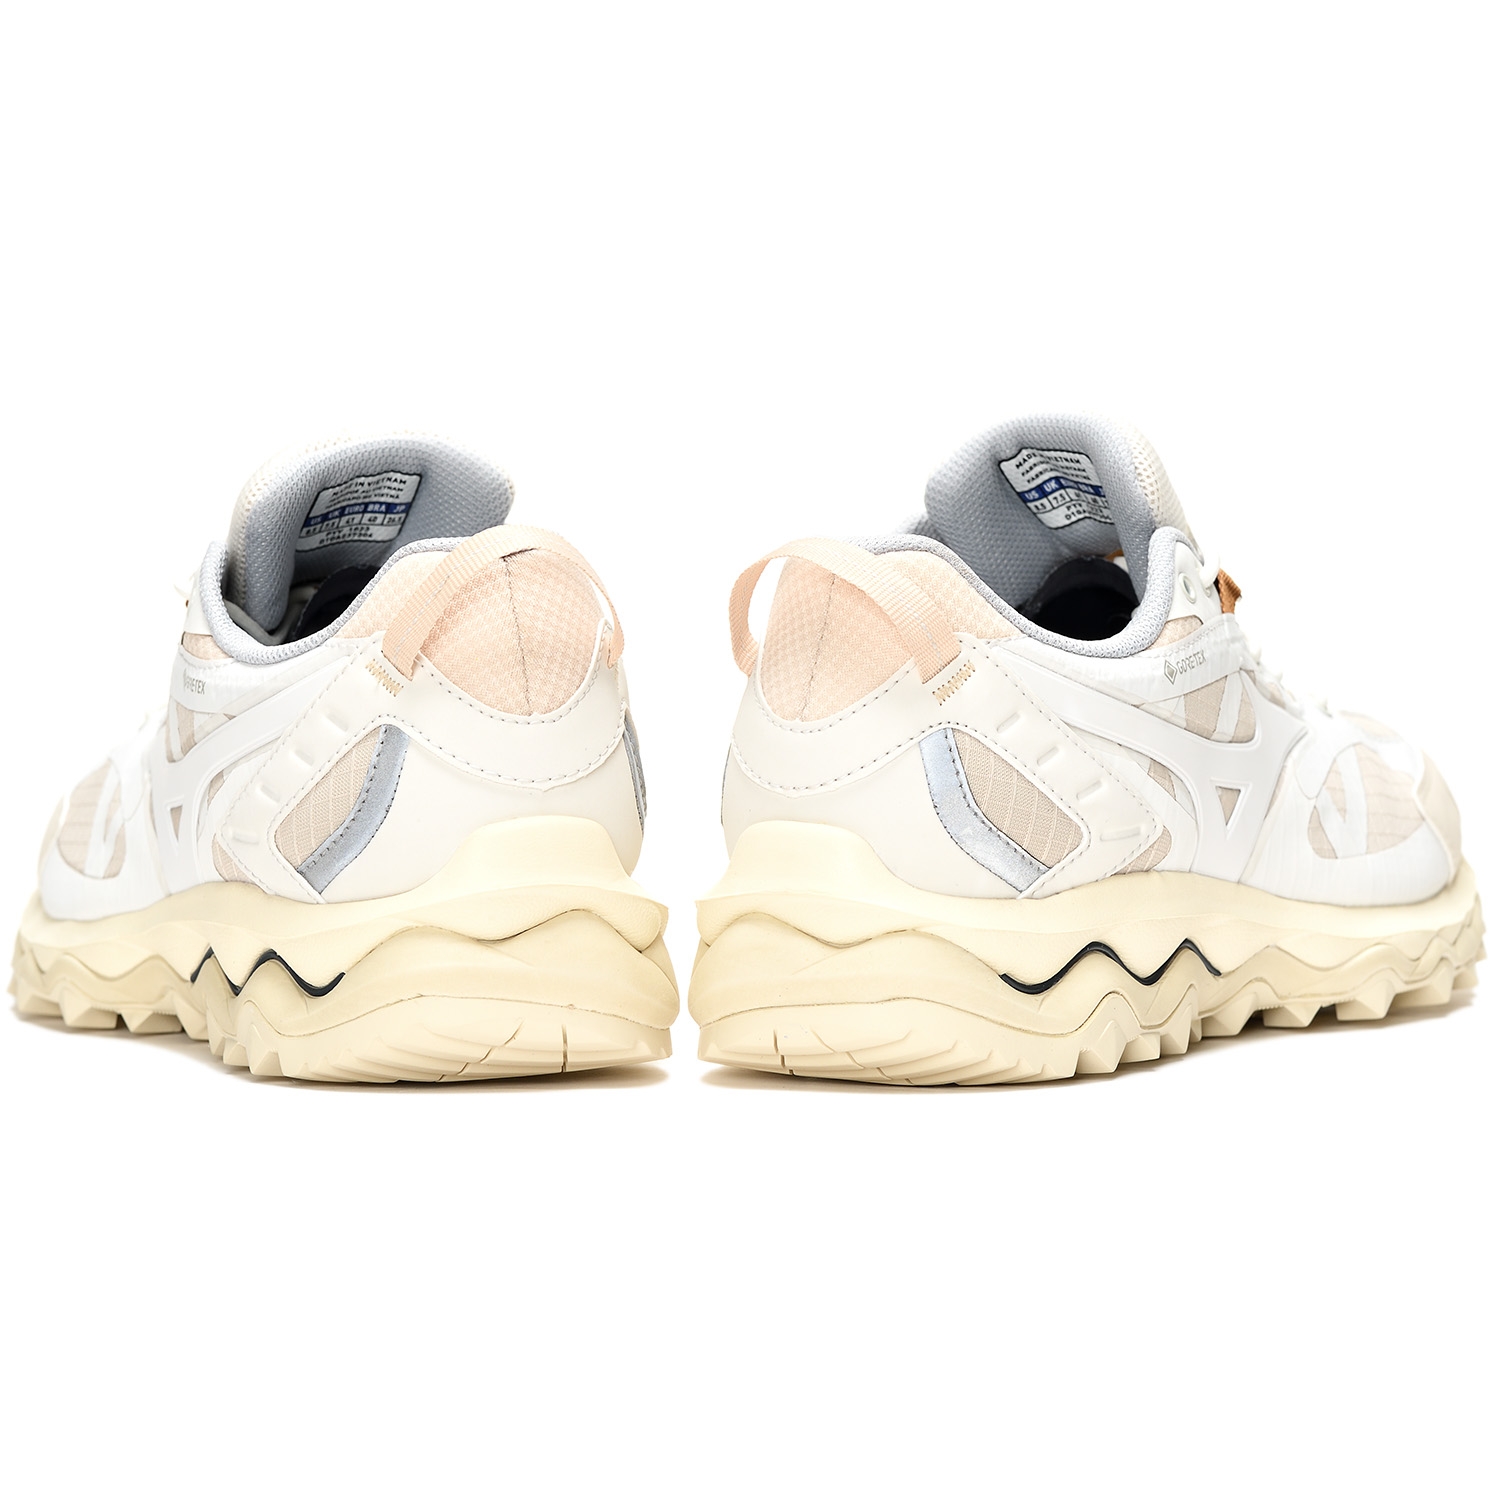 Mizuno Wave Mujin TL GORE-TEX SUMMER SAND/WHITE/MOTHER OF PEARL